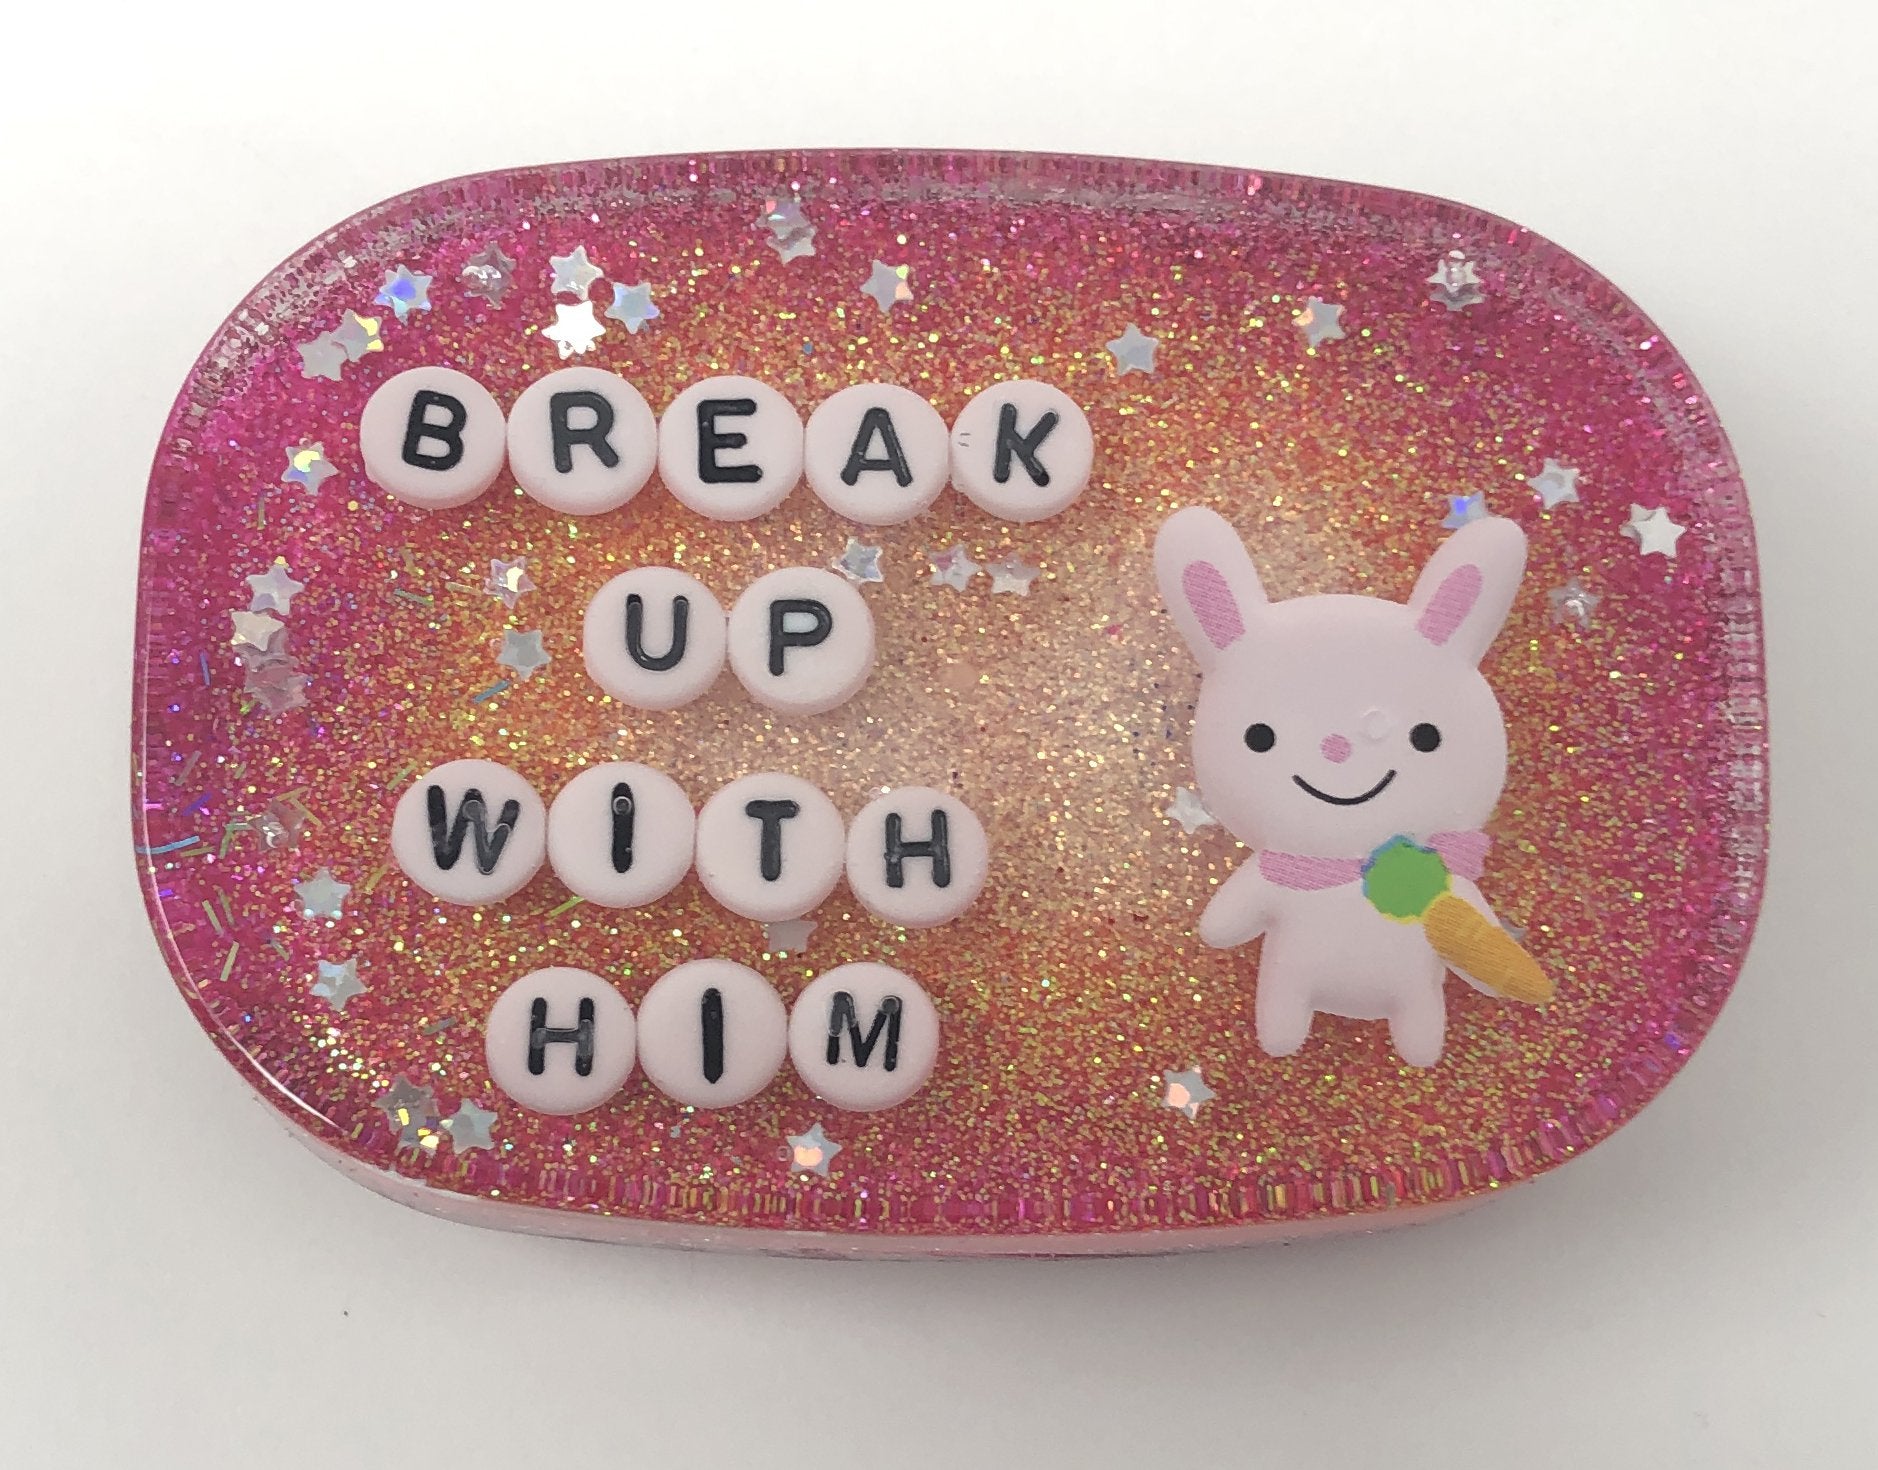 Break Up With Him - Small Shower Art - READY TO SHIP